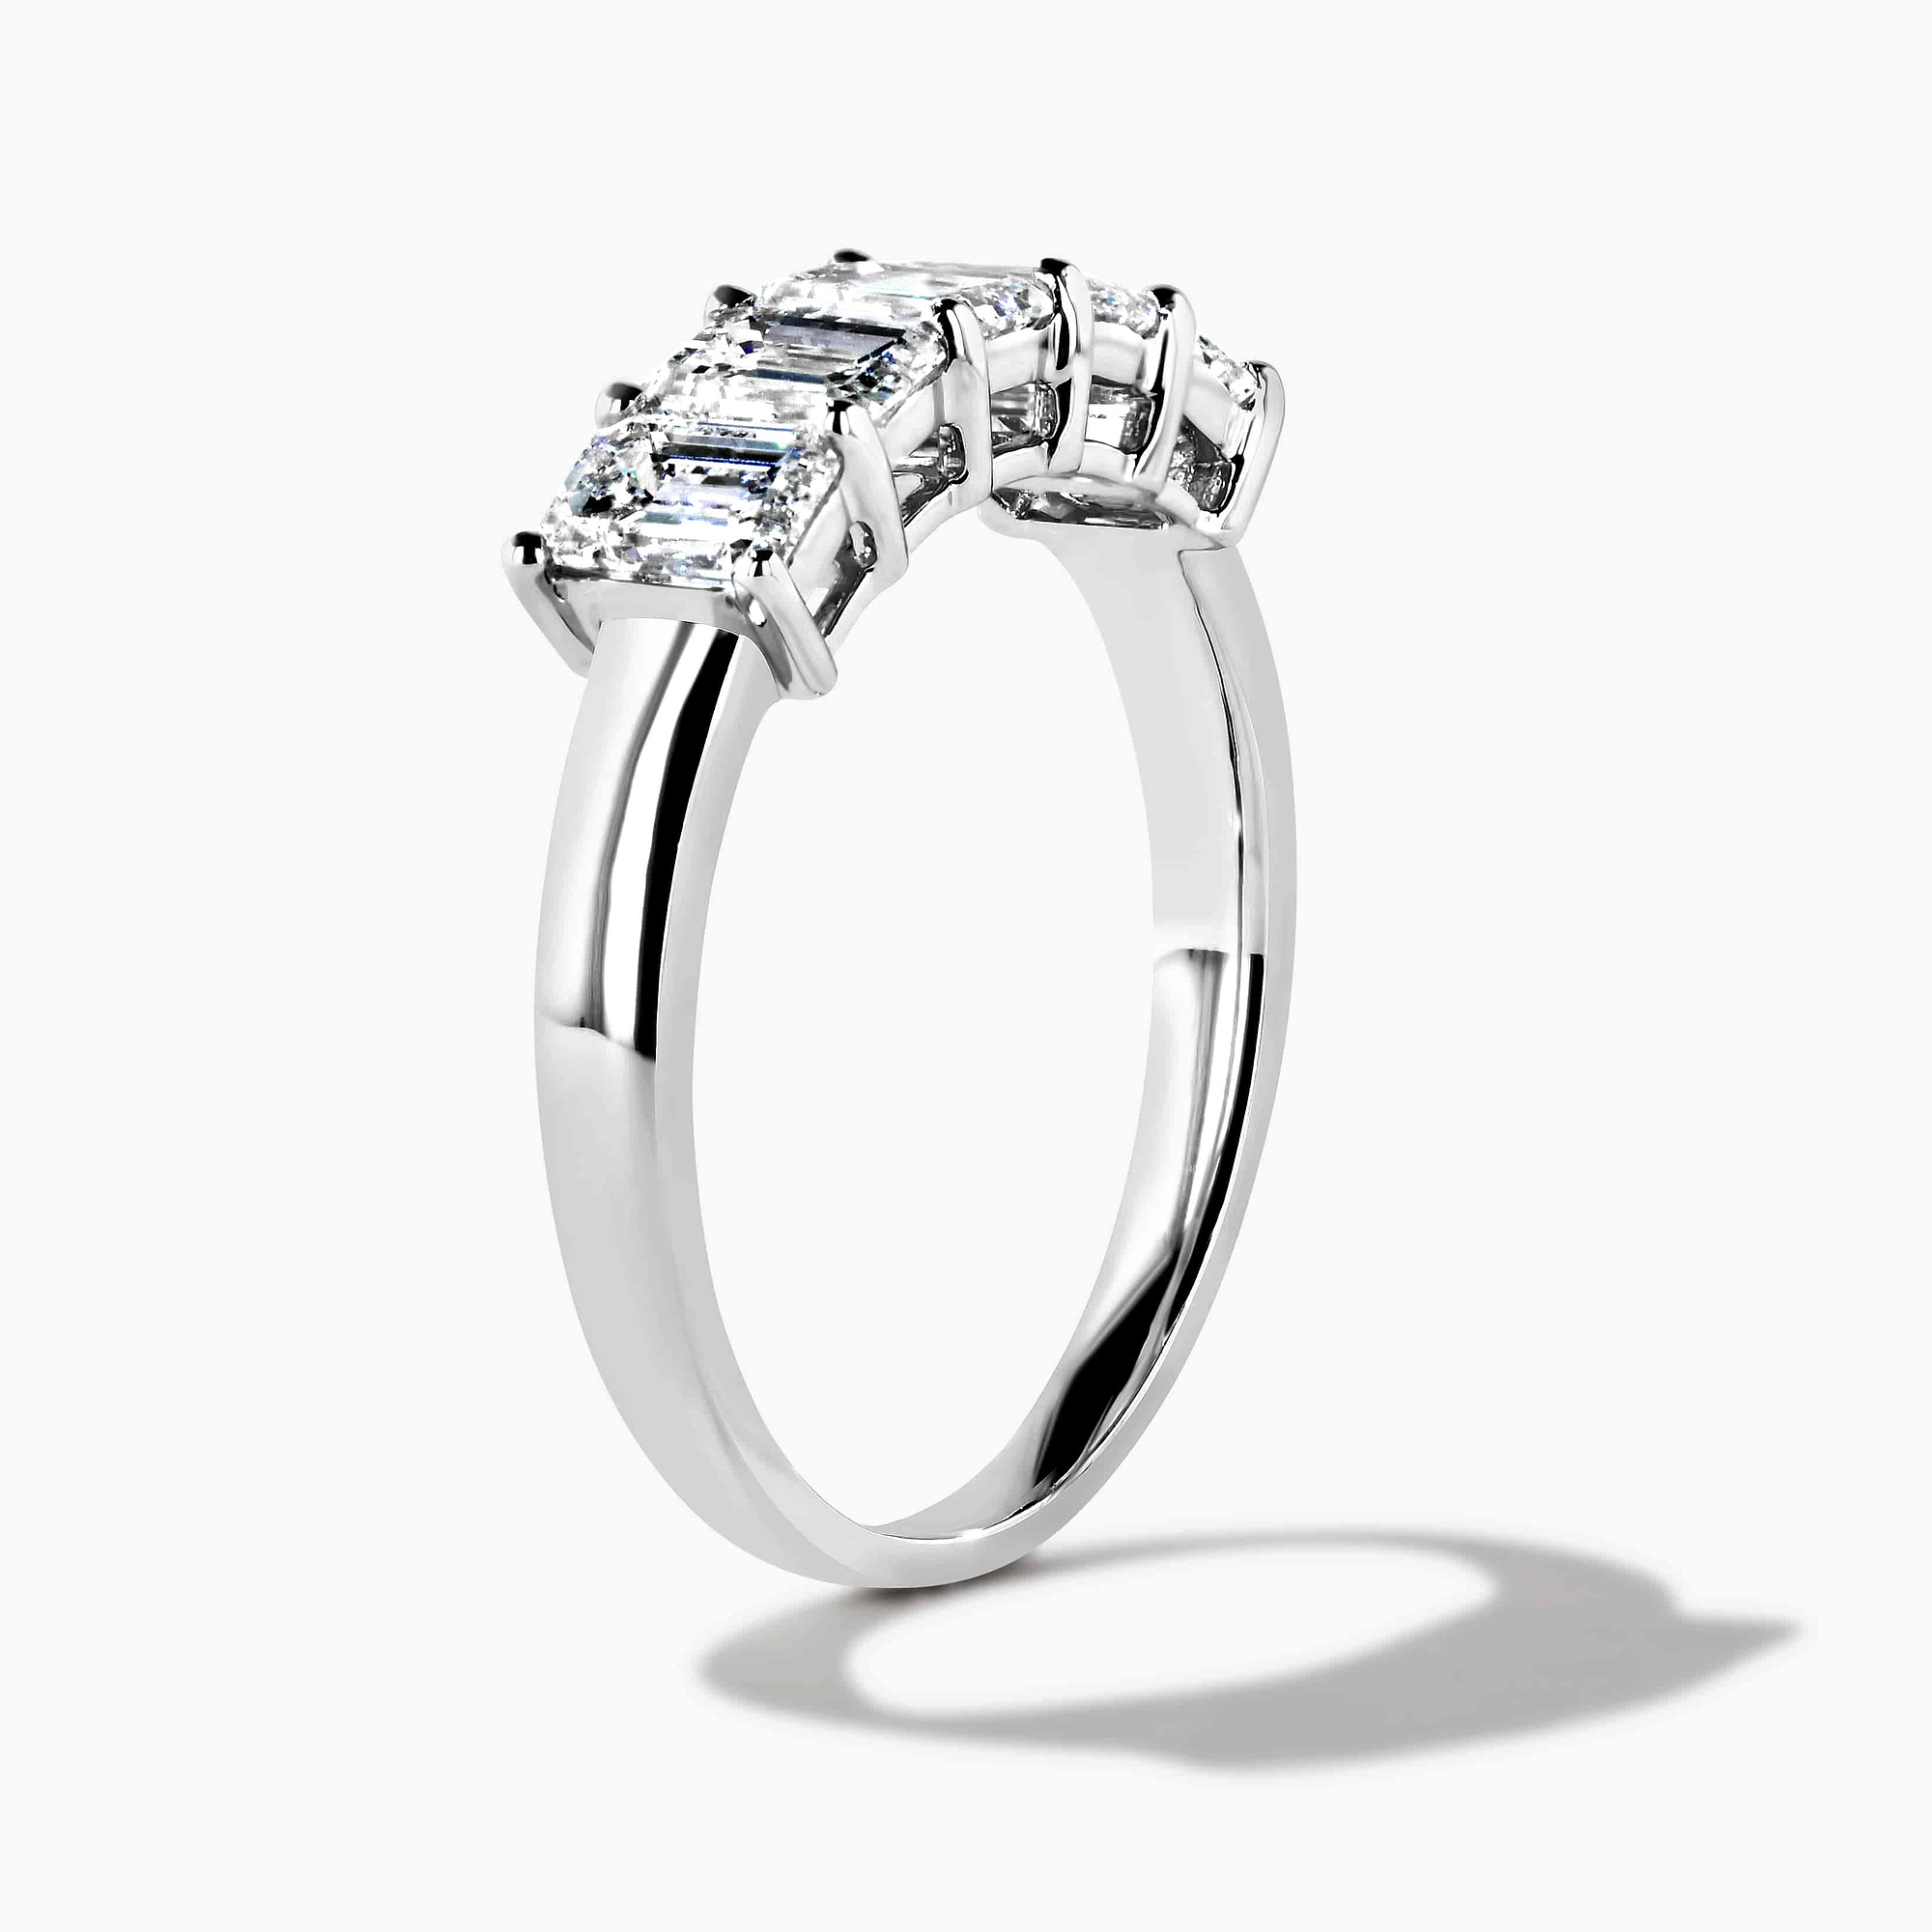 5 Stone Emerald Cut Band Shown In 14K White Gold|emerald cut lab grown diamond band set in 14k recycled white gold metal by MiaDonna